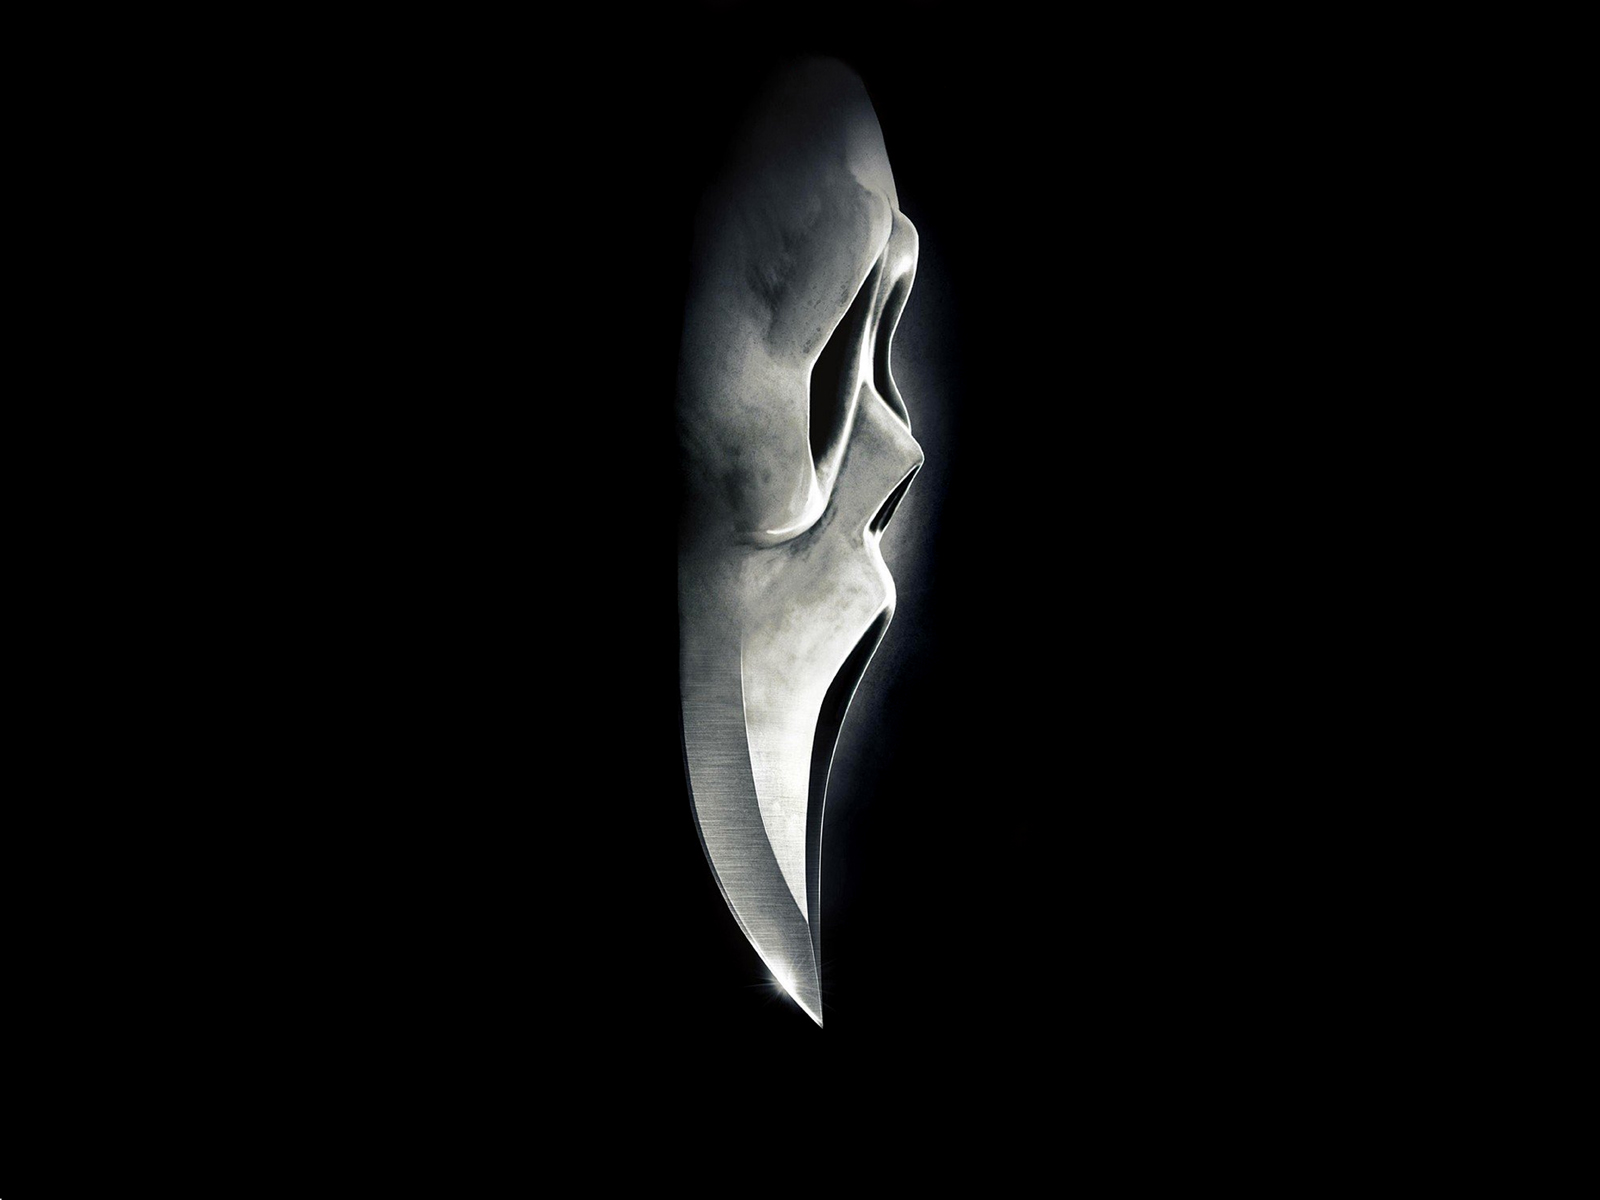 Download Ghostface Scream wallpapers for mobile phone free Ghostface  Scream HD pictures